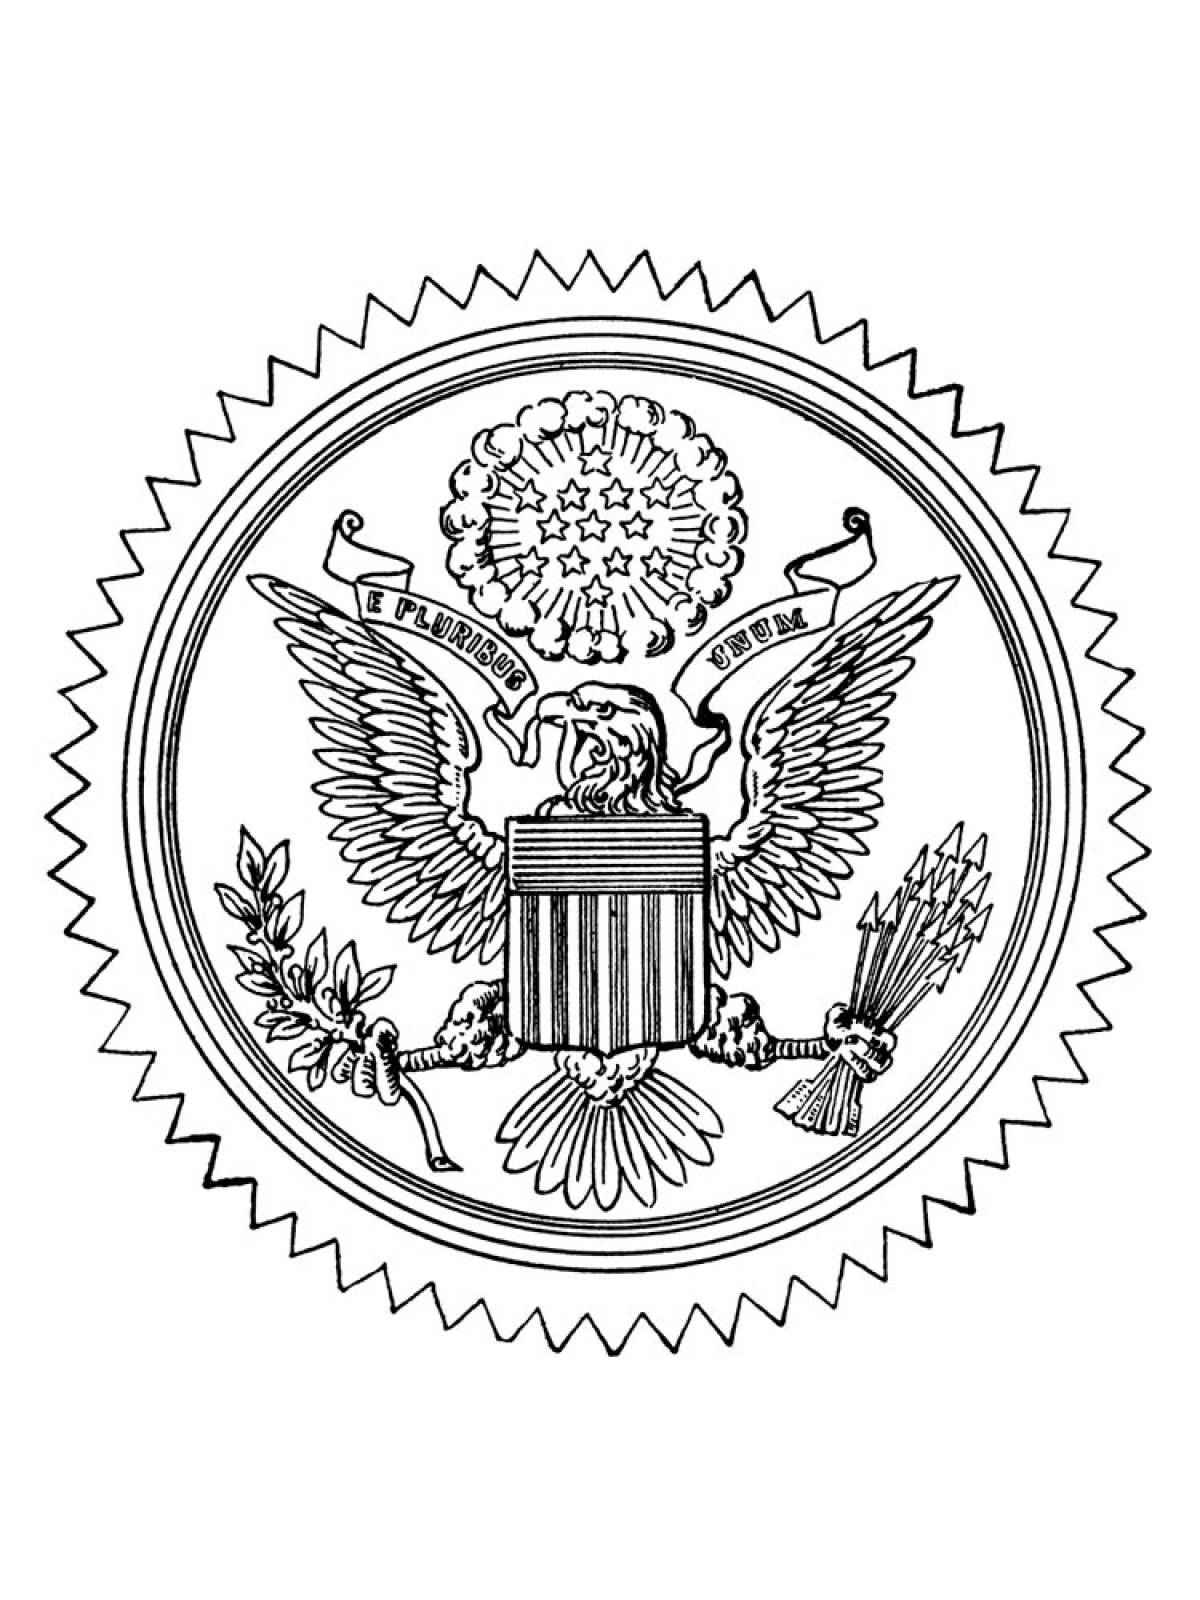 Coats of arms coloring page